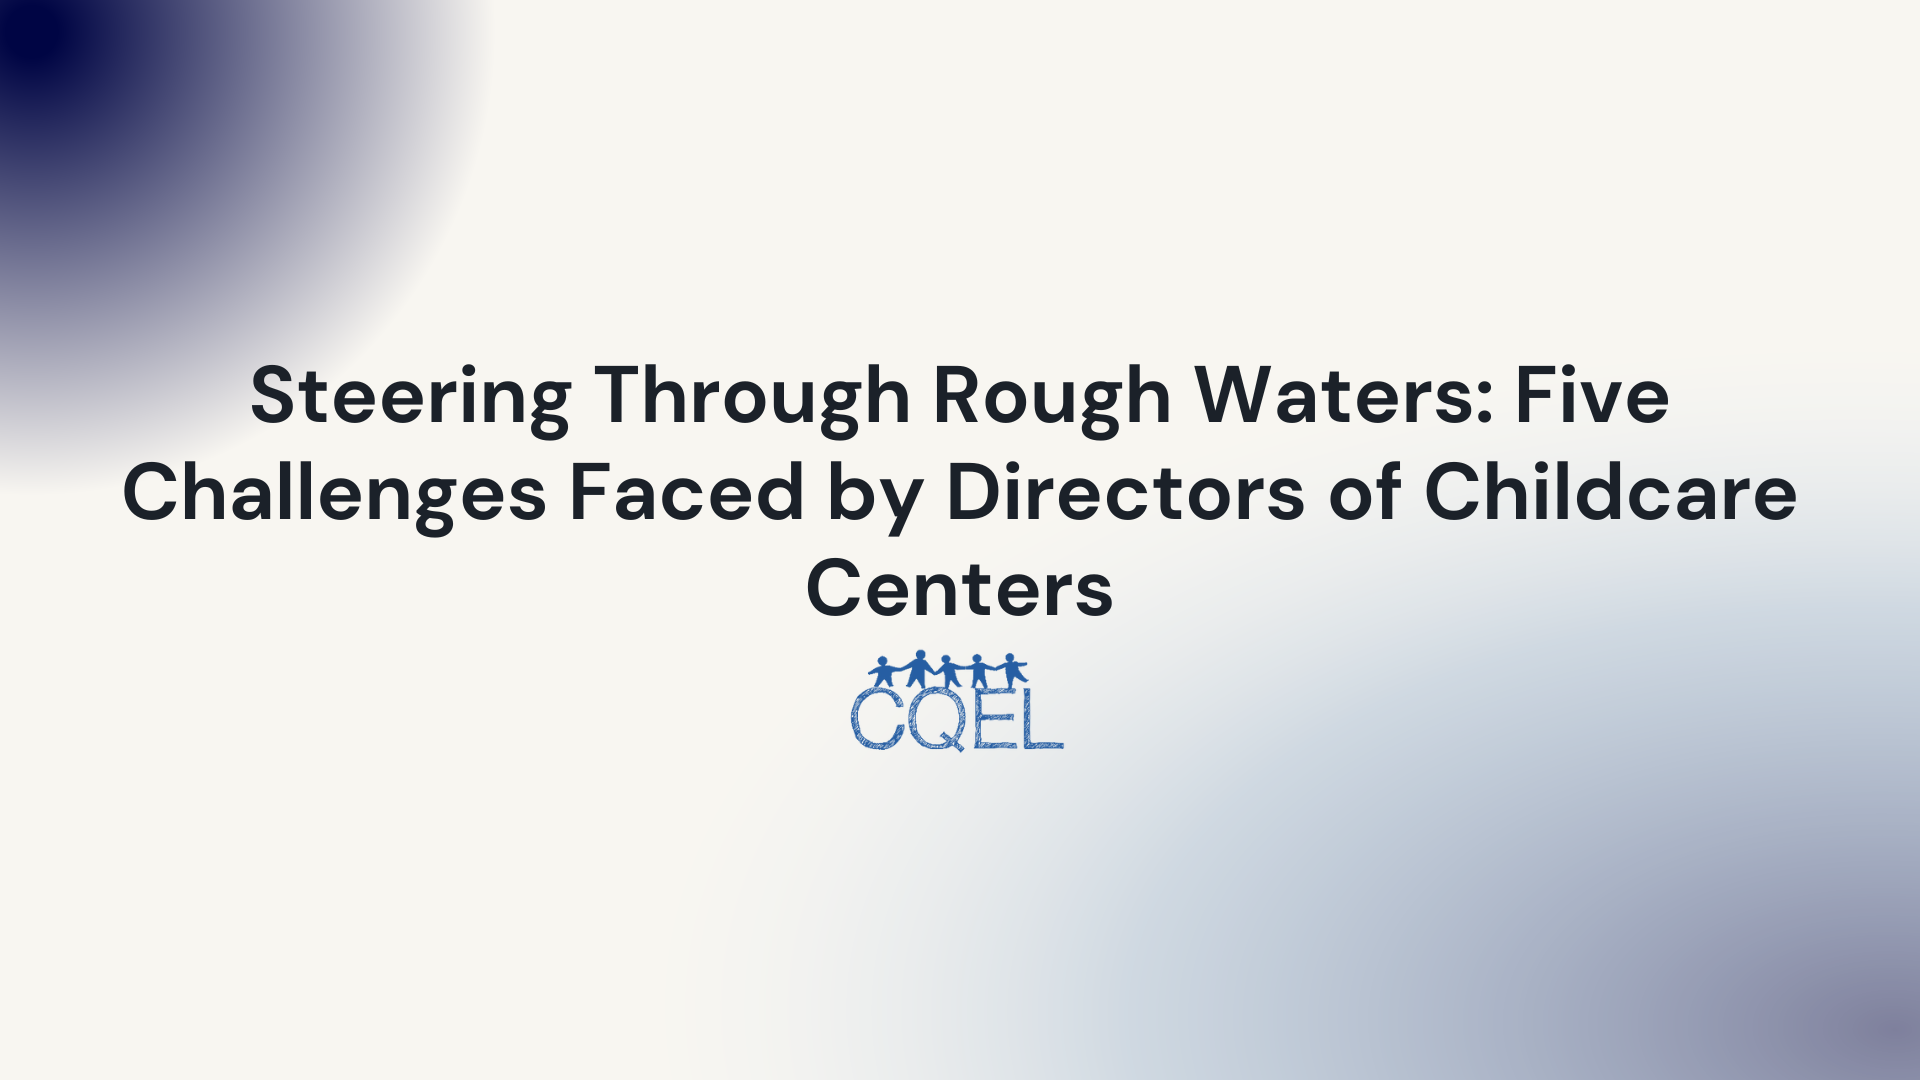 Steering Through Rough Waters: Five Challenges Faced by Directors of Childcare Centers